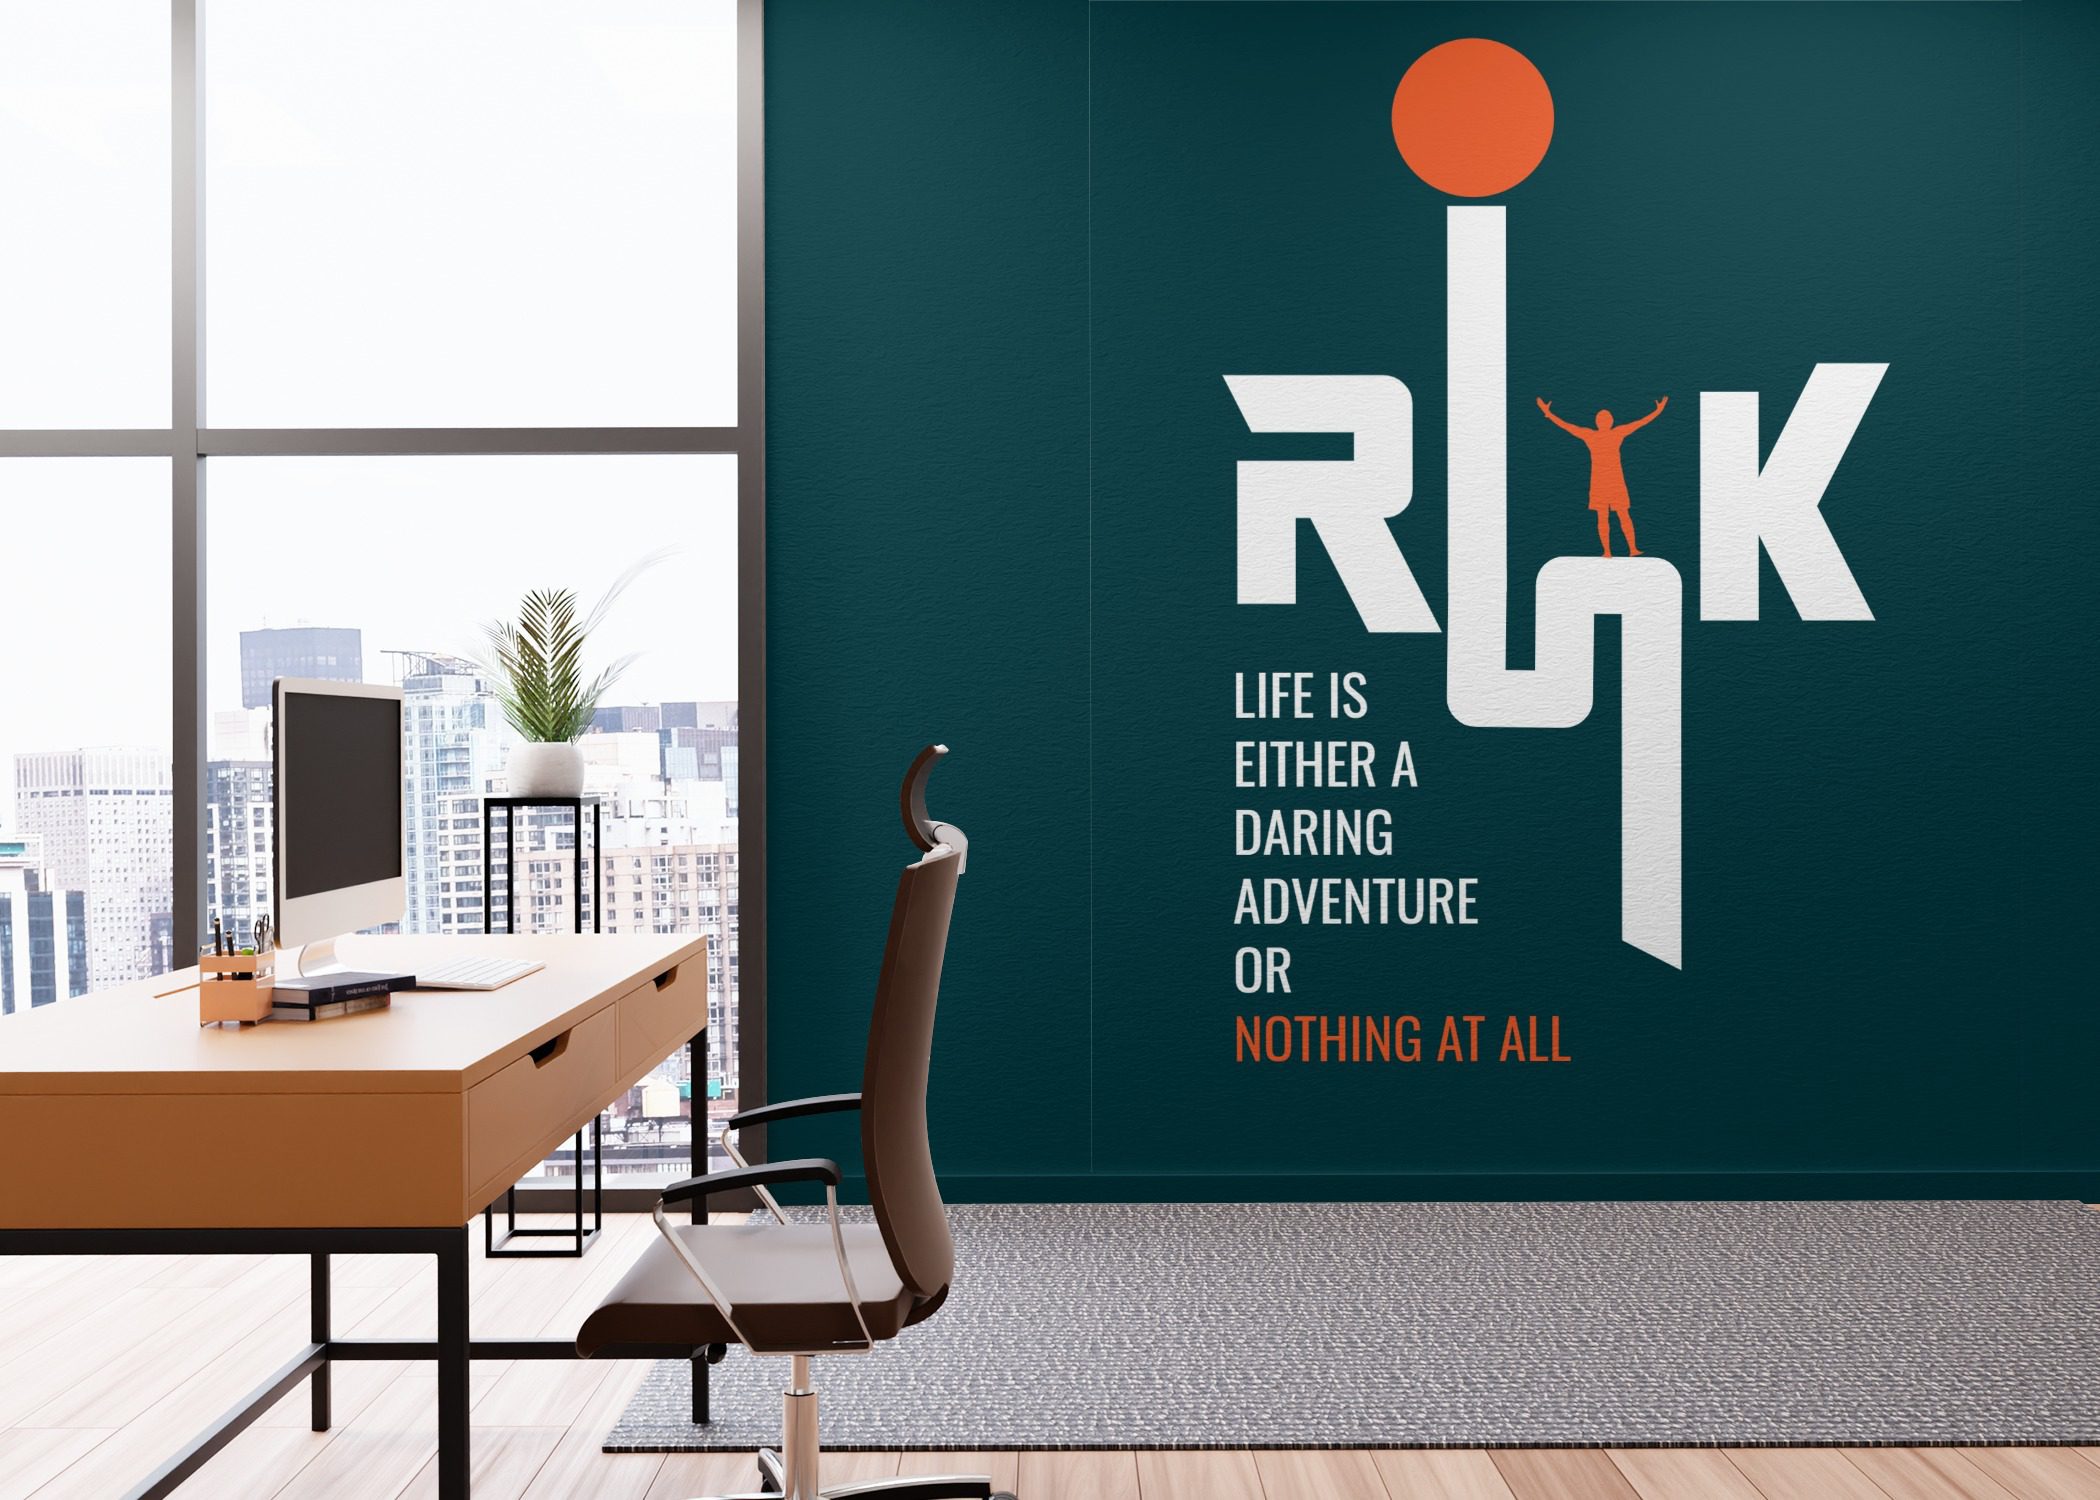 Wall Art Mockup for Corporate Office Room in from of Office Desk |  Mediamodifier